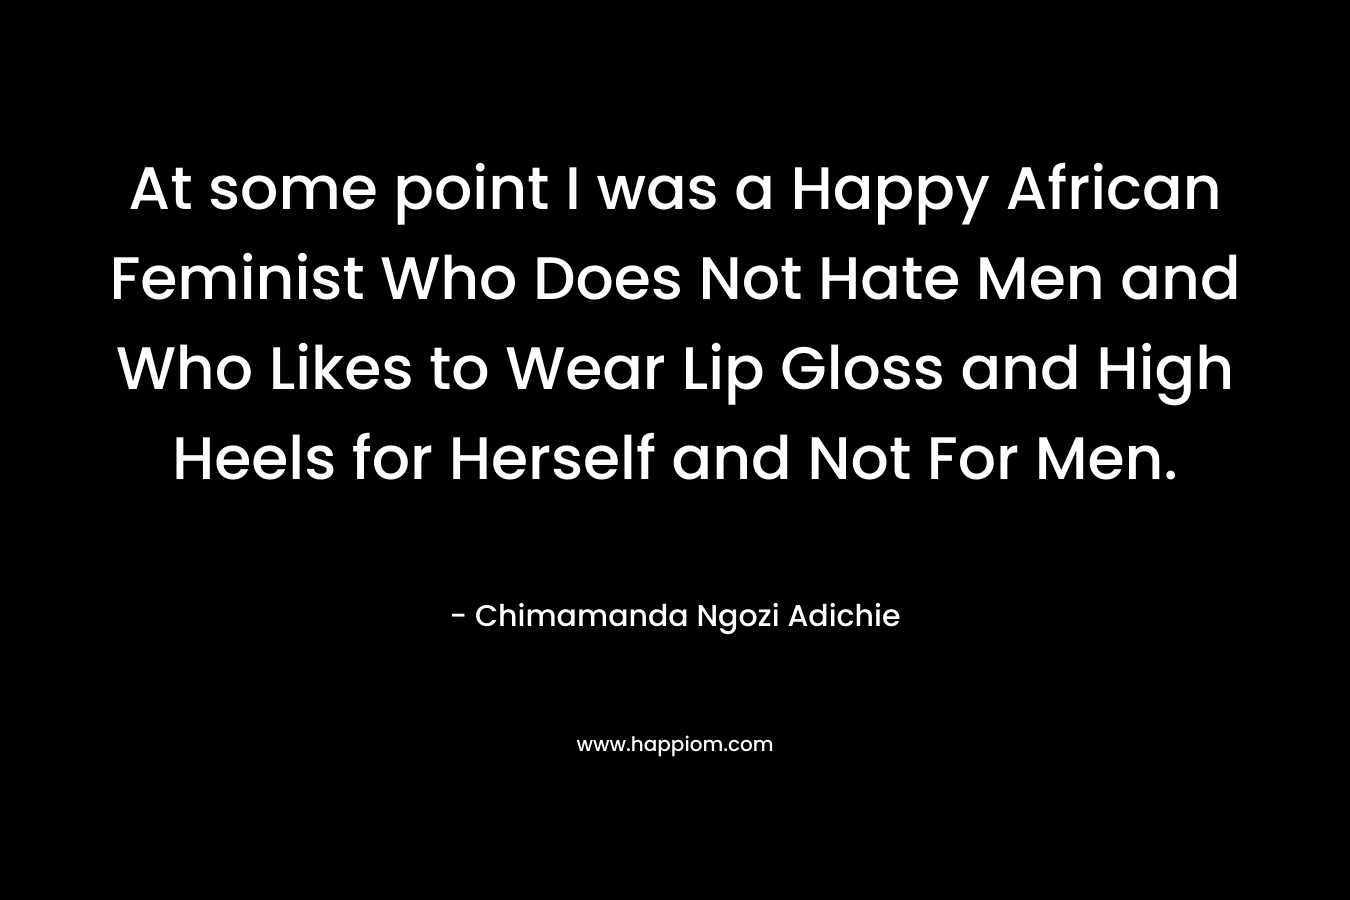 At some point I was a Happy African Feminist Who Does Not Hate Men and Who Likes to Wear Lip Gloss and High Heels for Herself and Not For Men.